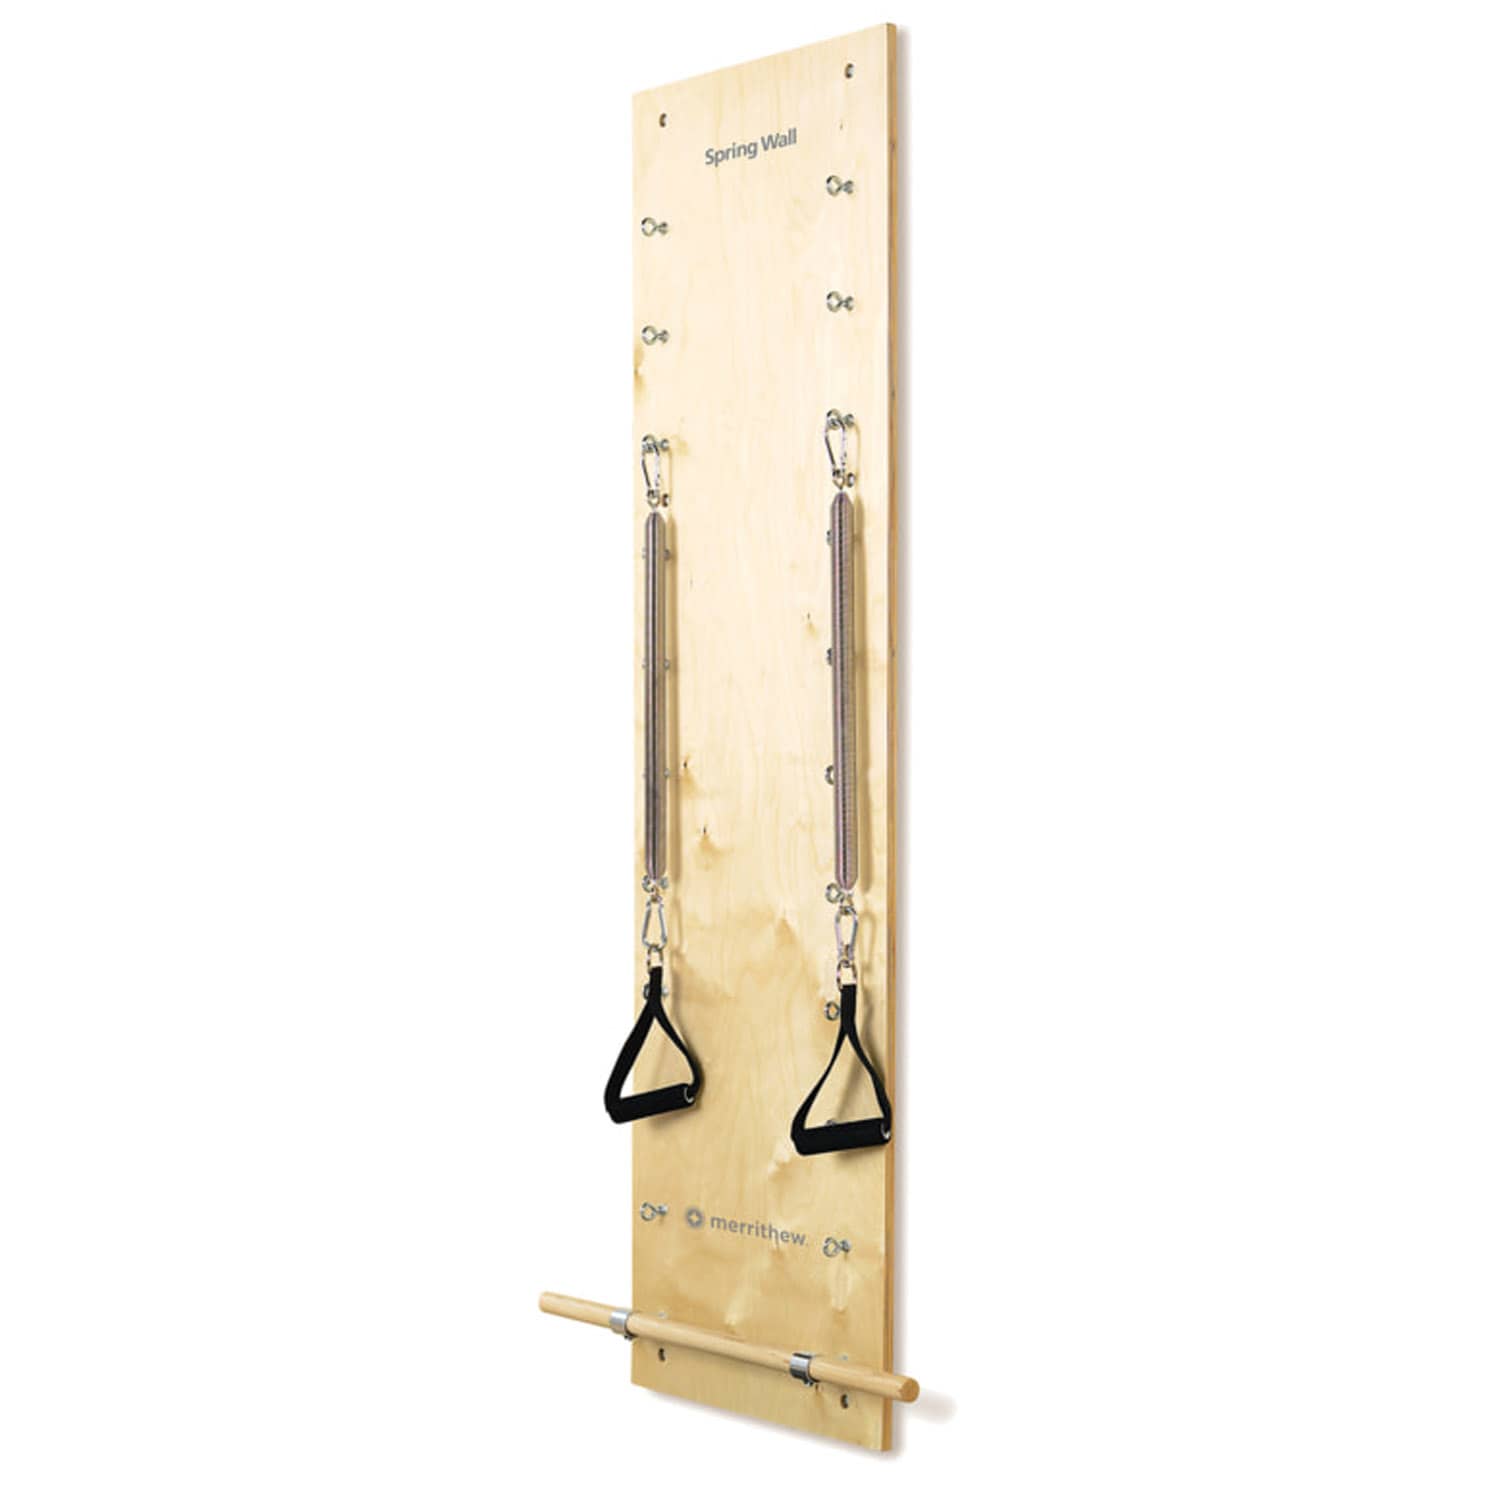 Merrithew Spring Wall™ for Pilates, ST-01052 - Athletix.ae